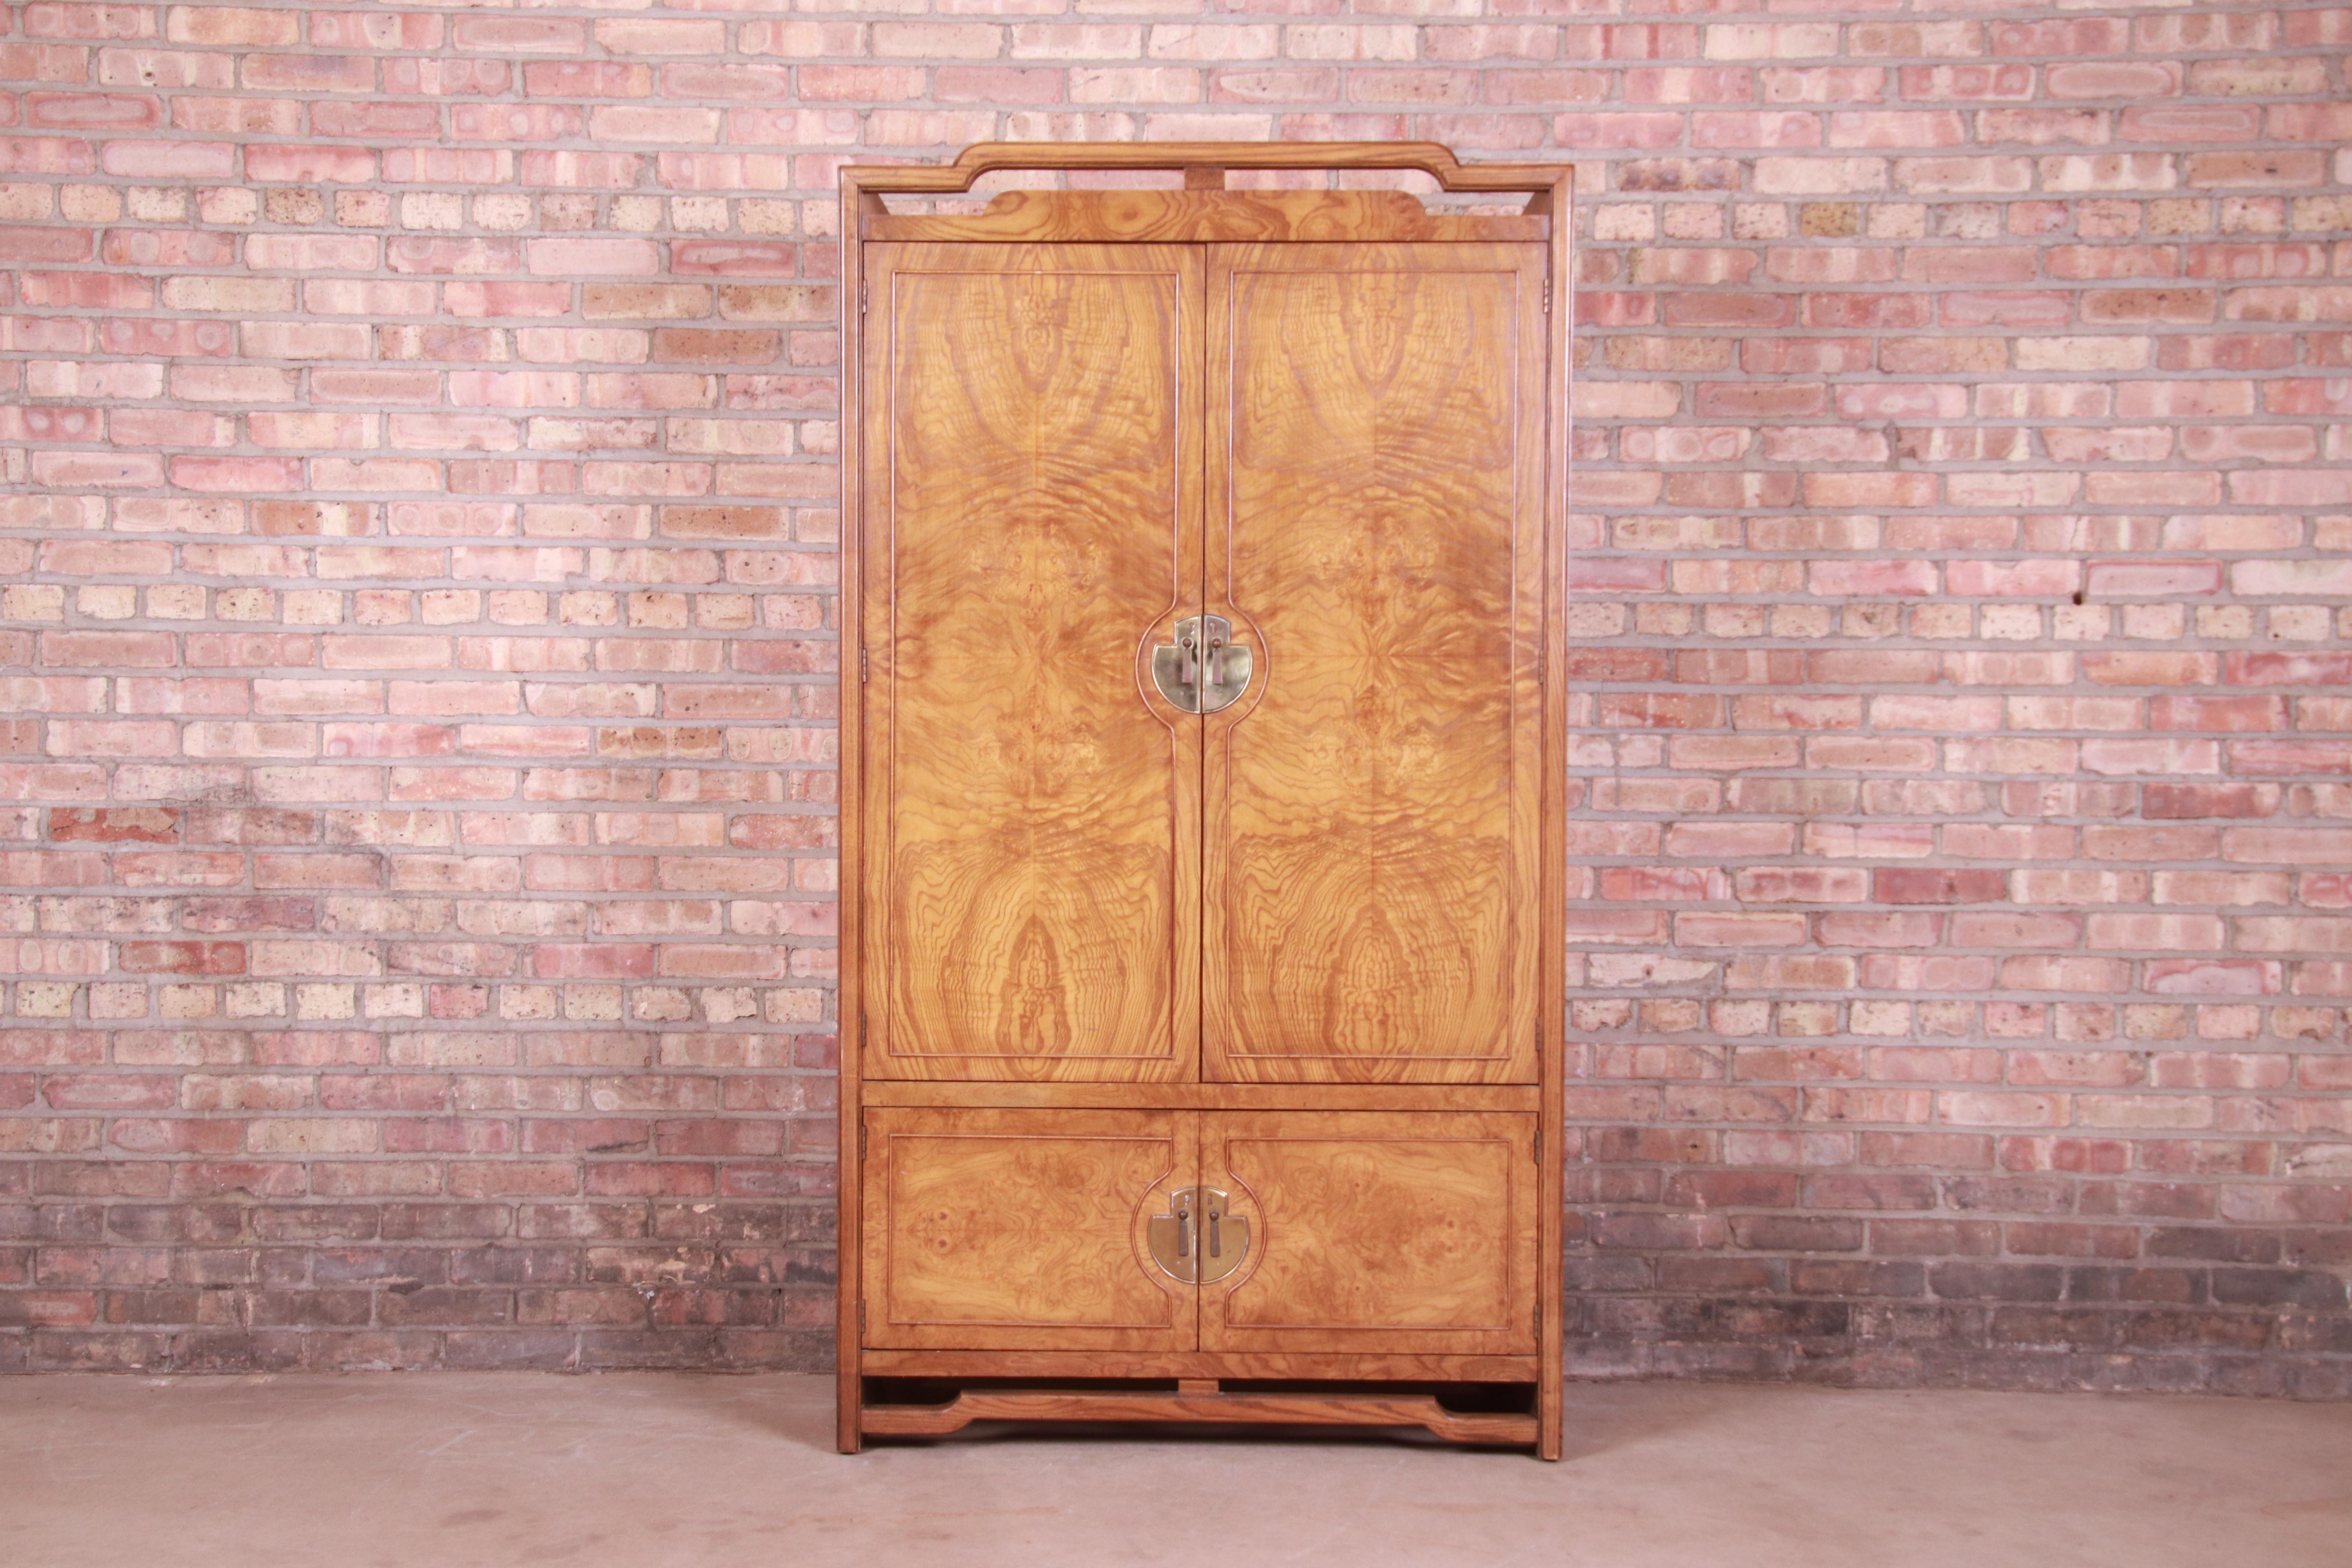 An exceptional Mid-Century Modern Hollywood Regency Chinoiserie gentleman's chest or armoire dresser

By Thomasville

USA, 1970s

Burled olive wood, with original Asian-inspired brass hardware.

Measures: 40